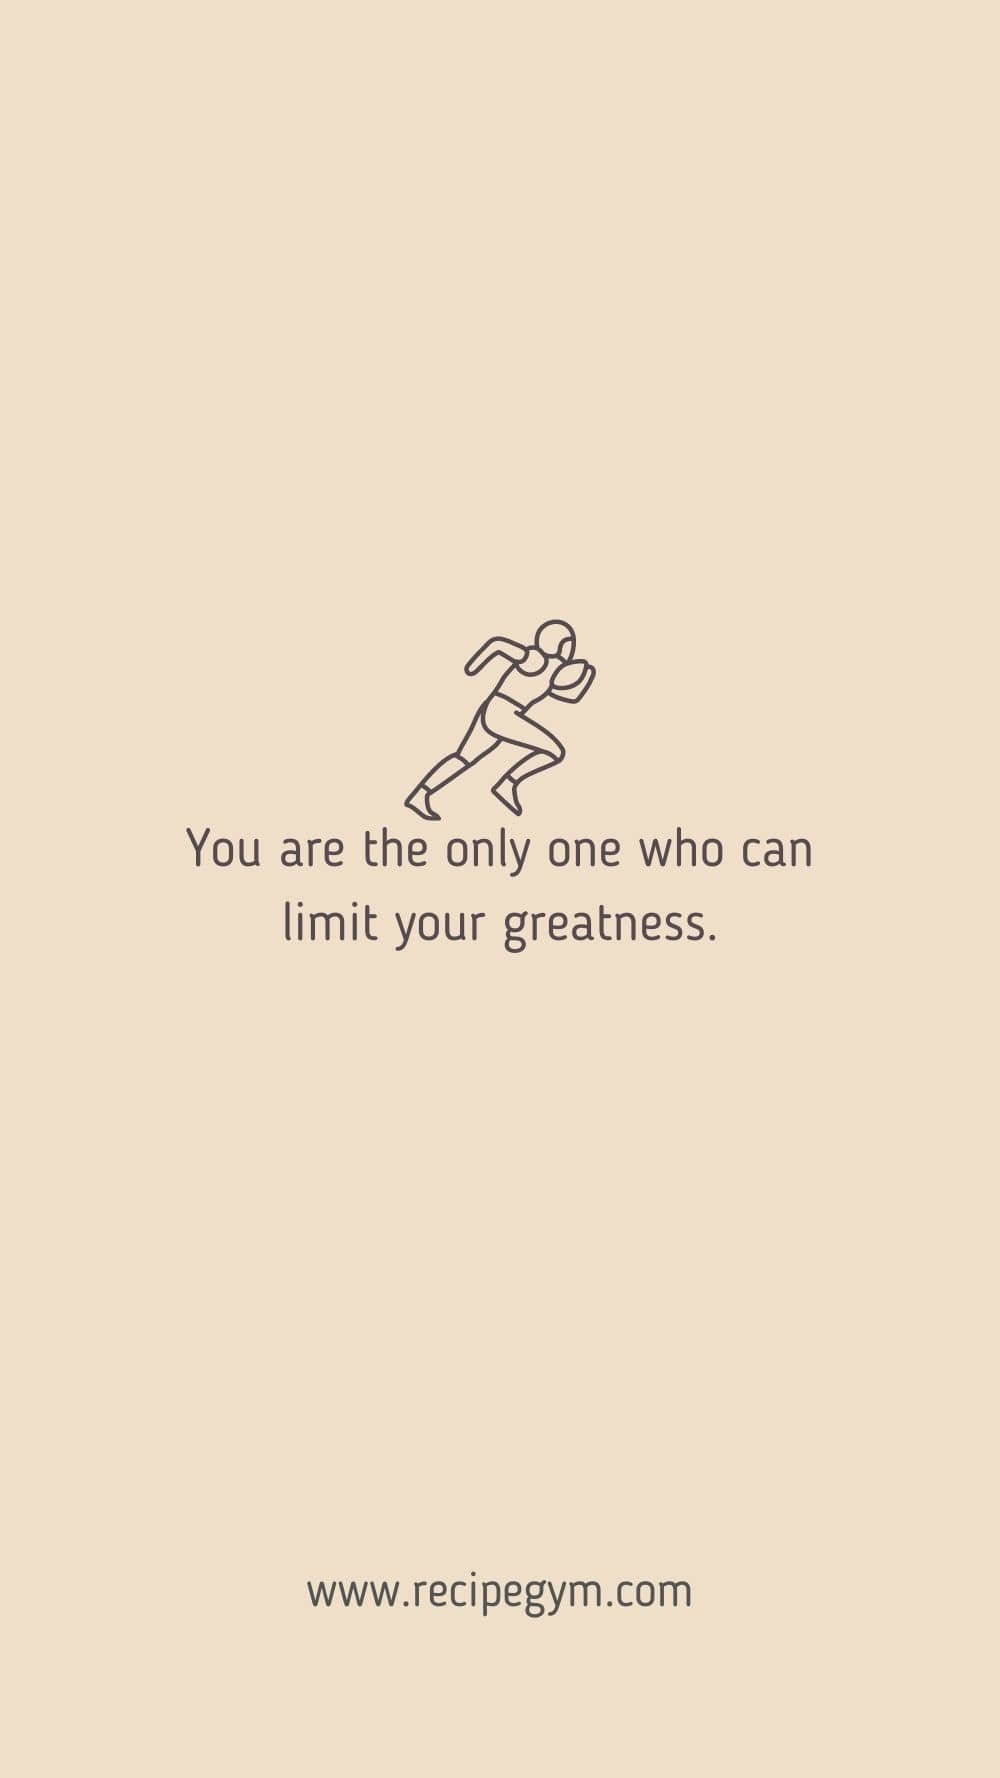 You are the only one who can limit your greatness